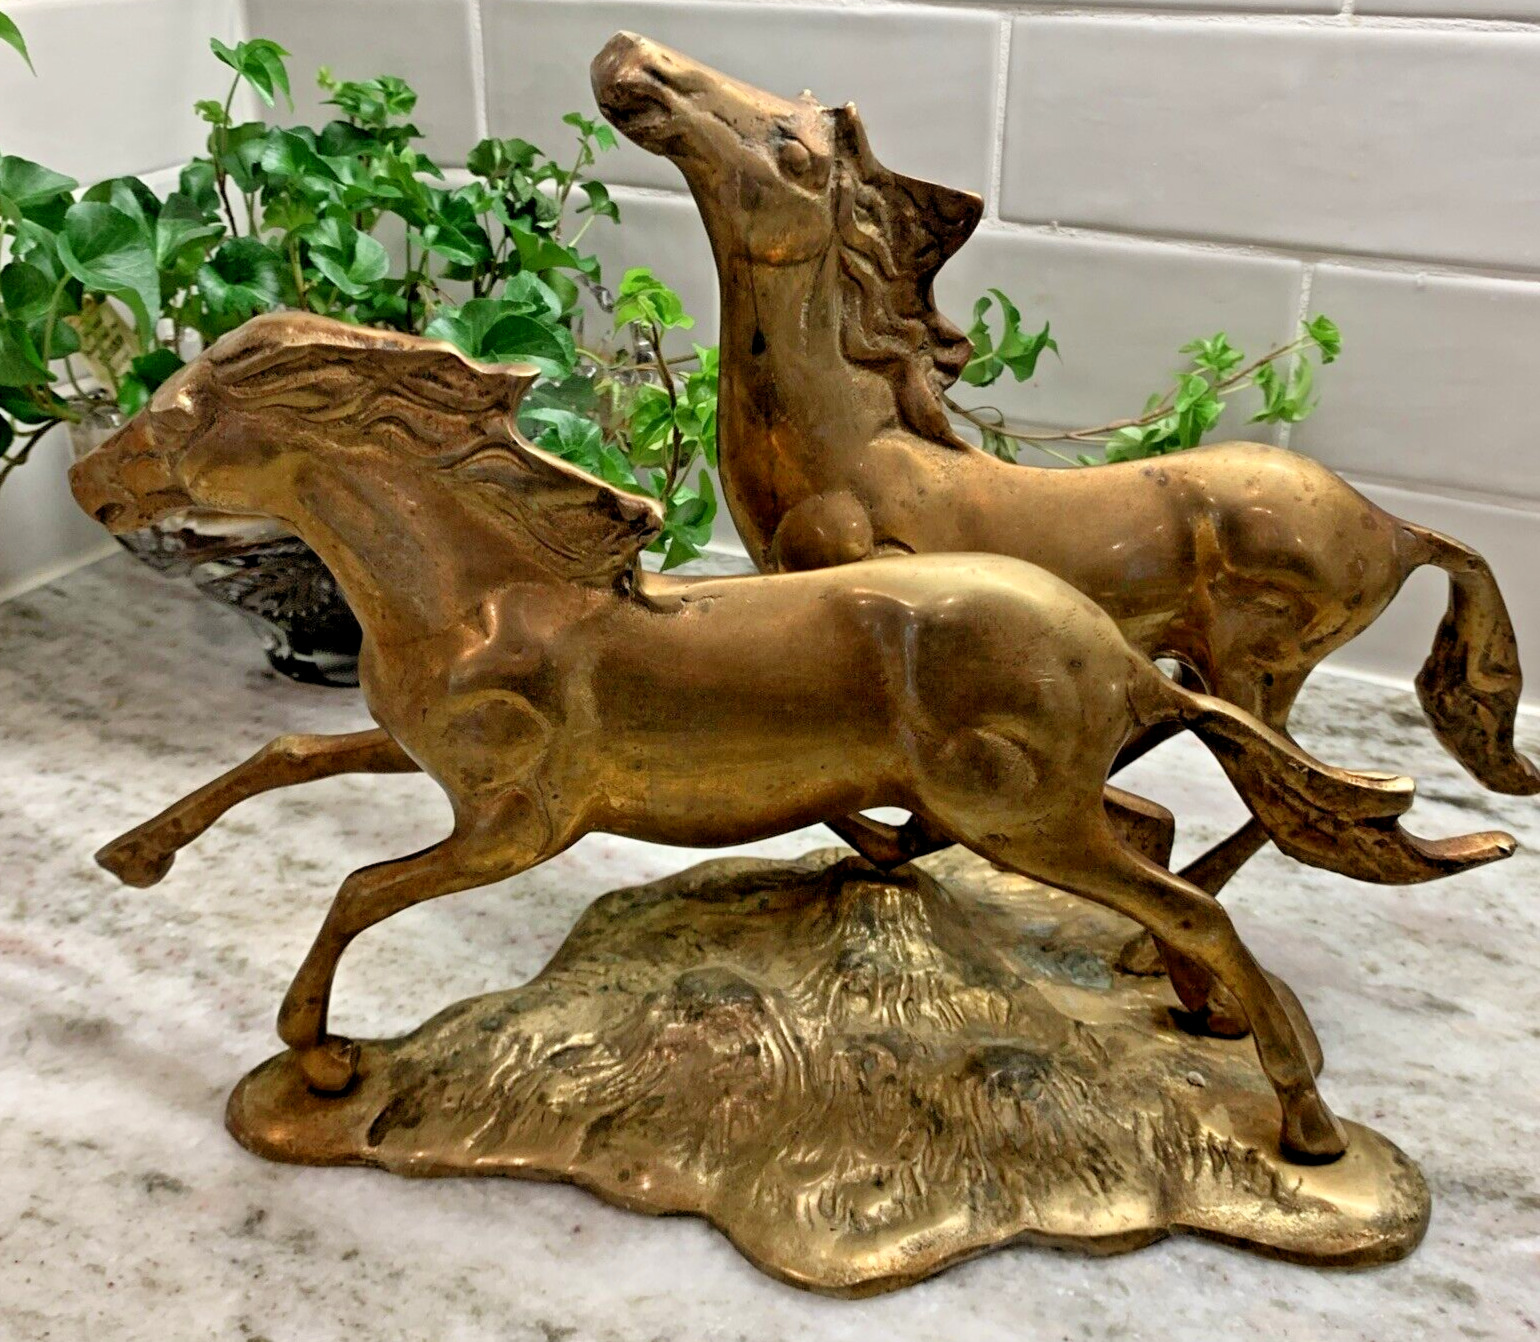 Vintage Wild Horses Galloping Free - Great Beauty Captured in Brass Sculpture